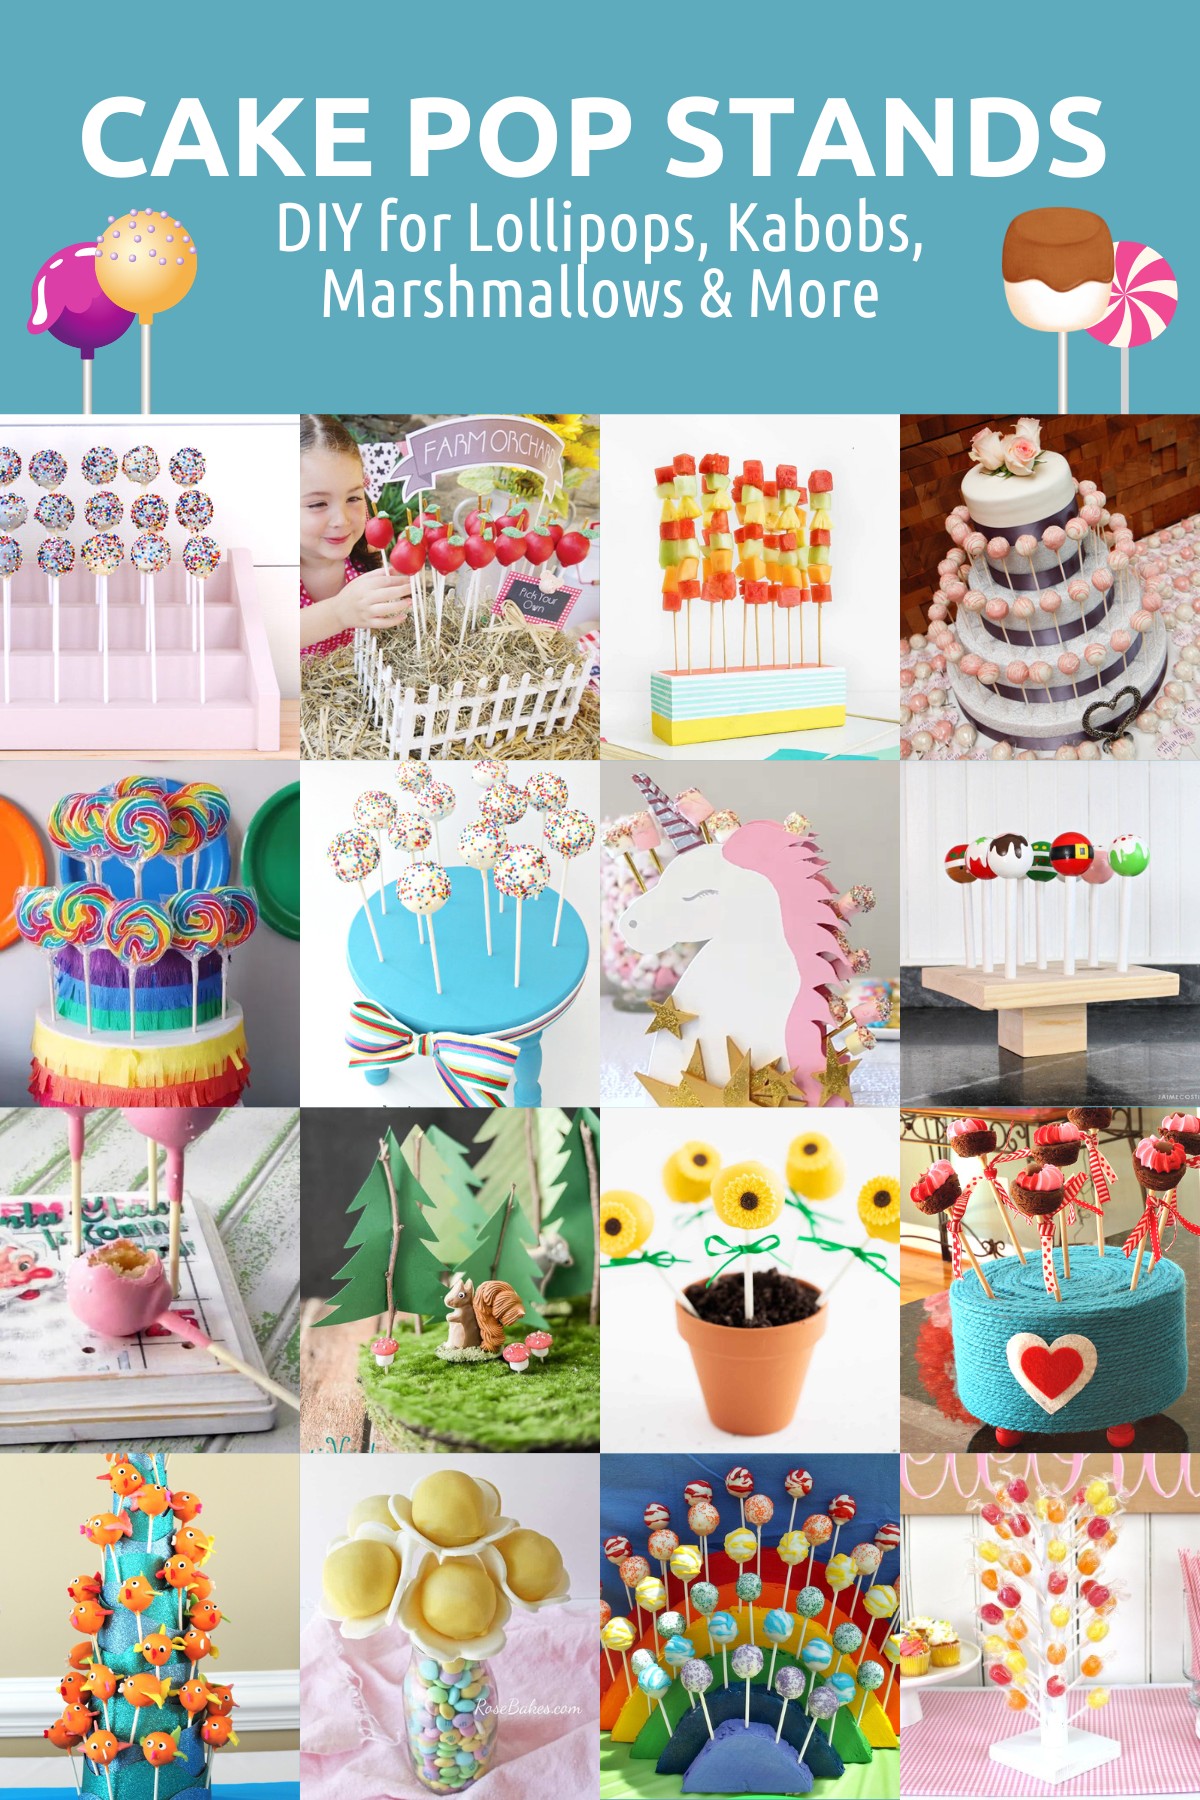 Create Your Own Cake Pop Stand